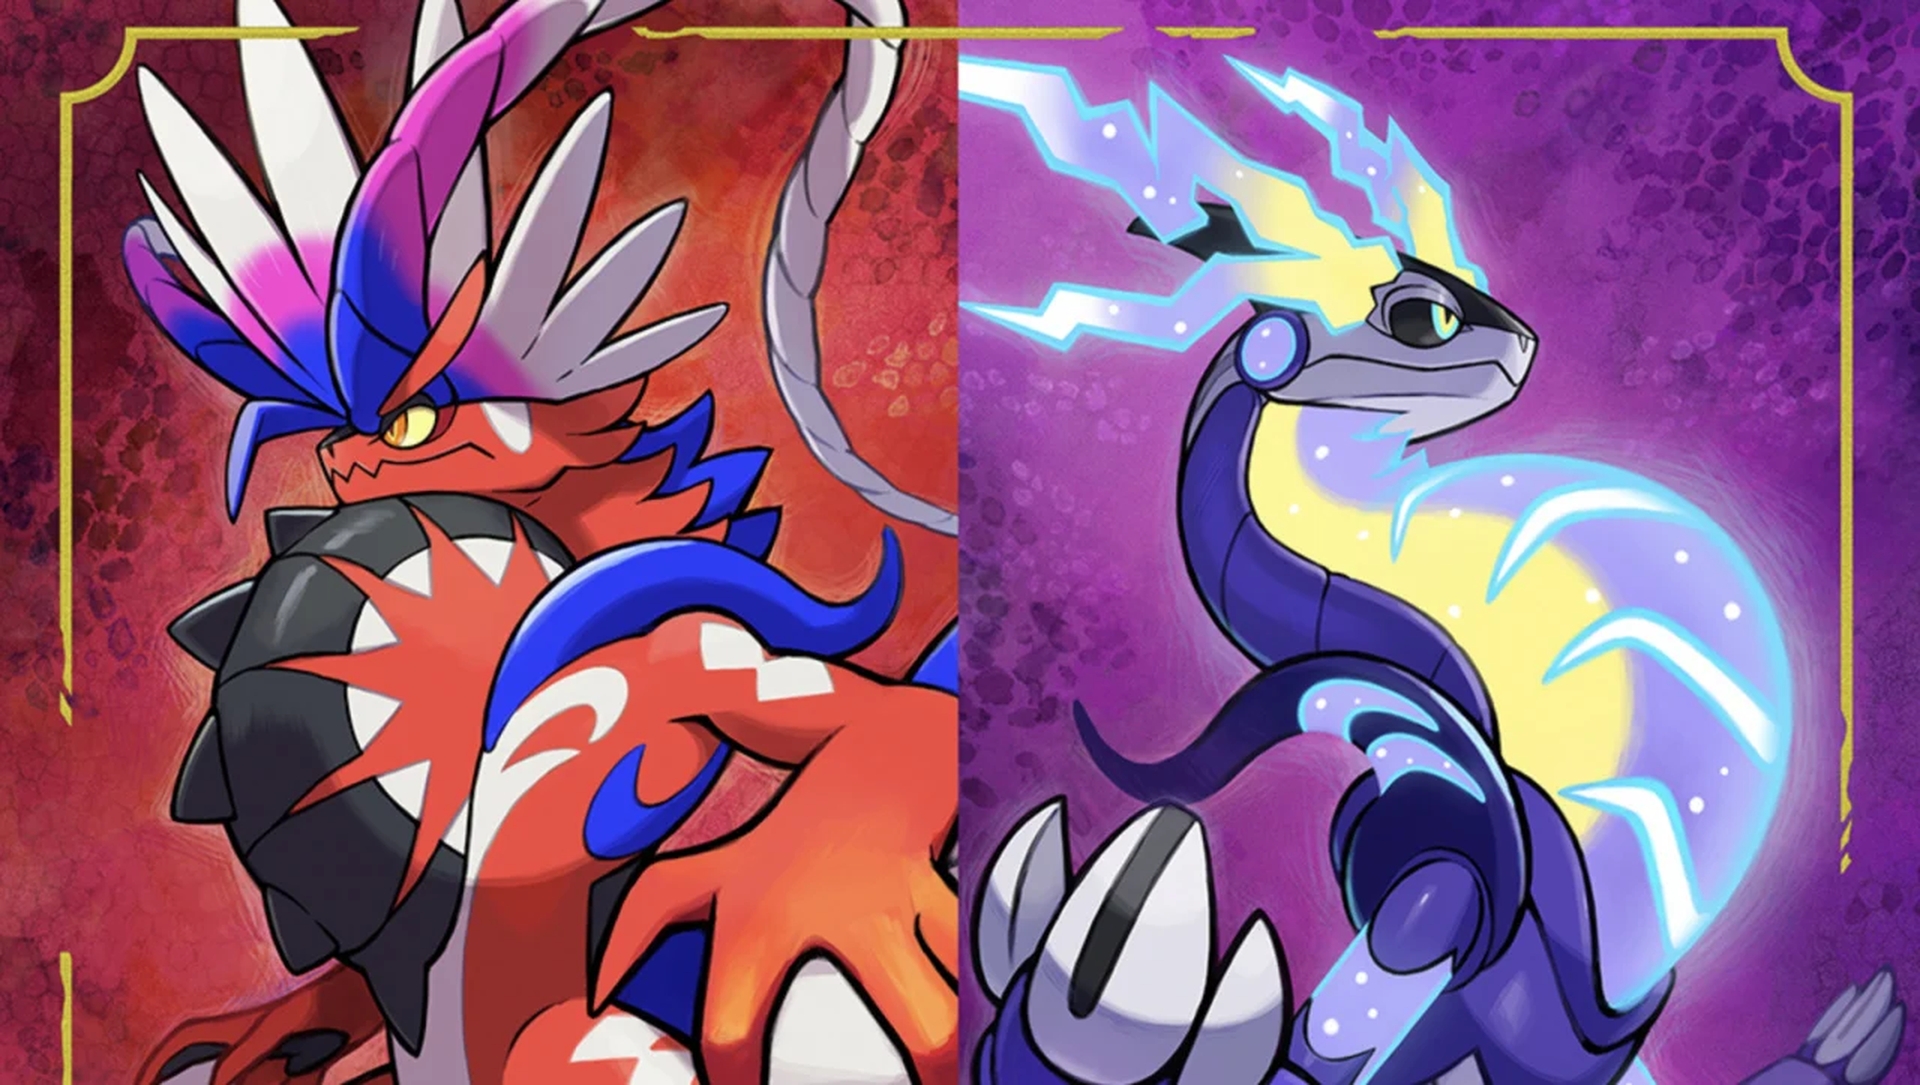 Today, we are going to be covering Pokemon Scarlet and Violet differences and will try to answer the question "Which is better Scarlet or Violet?"